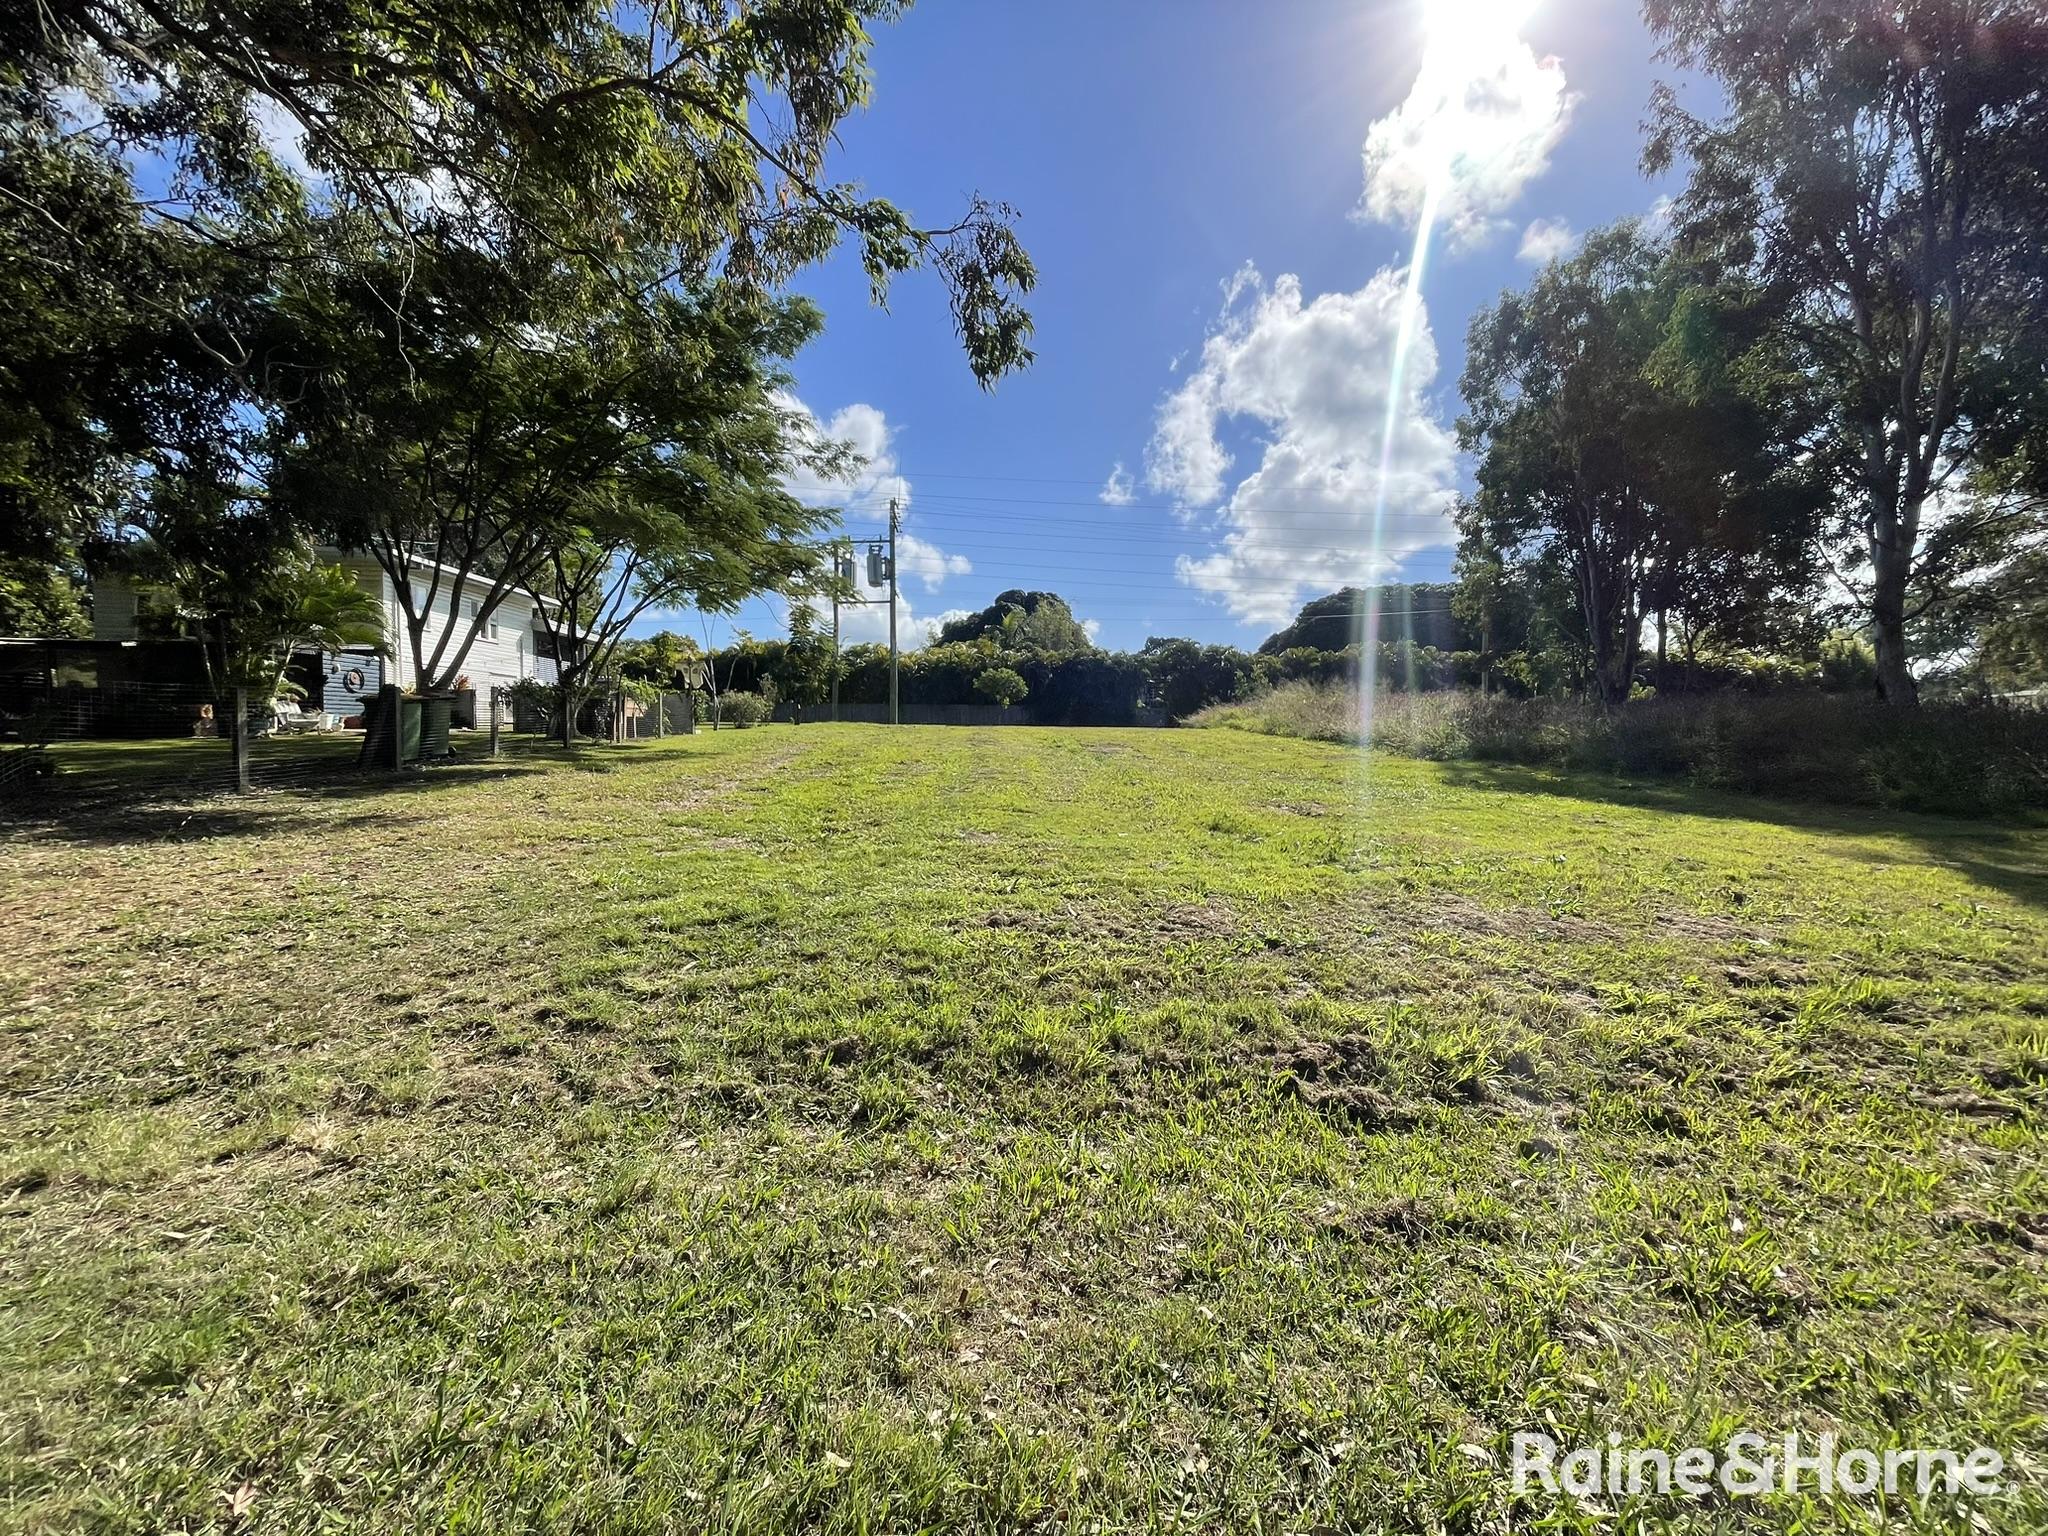 Russell Island 759sqm Flat. Cleared no trees. Wanted location